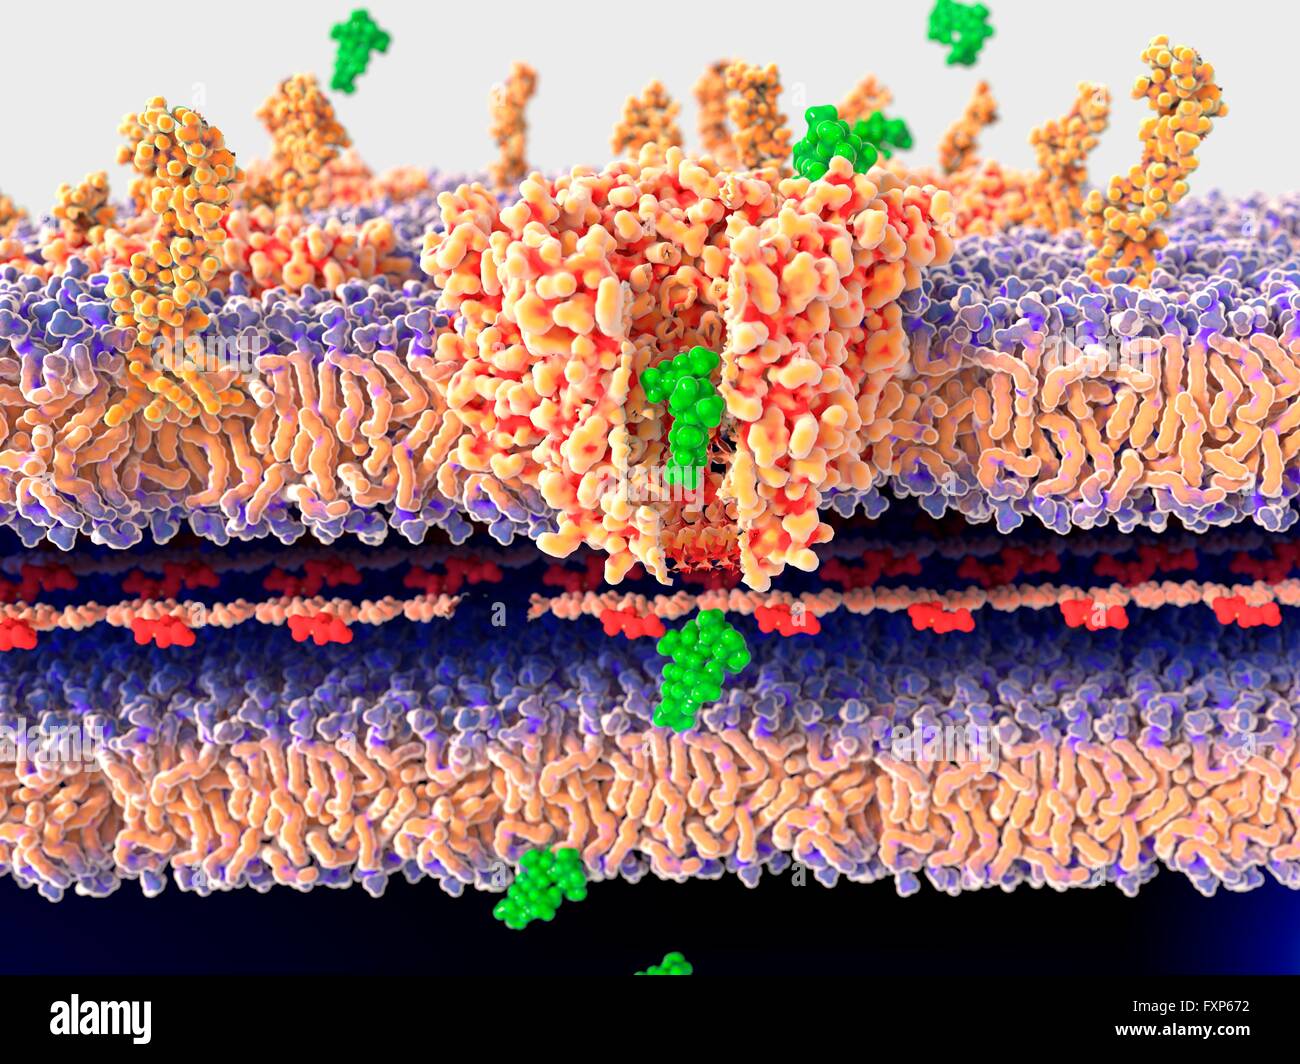 Antibiotic passing through bacterial wall. Illustration of the molecular mechanism of antibiotic action. An antibiotic (streptomycin, green) is passing through the bacterial wall through the channel protein porin. This will lead to the death of the bacterium. For images showing the molecular mechanism of antibiotic resistance, see F013/1540 and F013/1538. Stock Photo